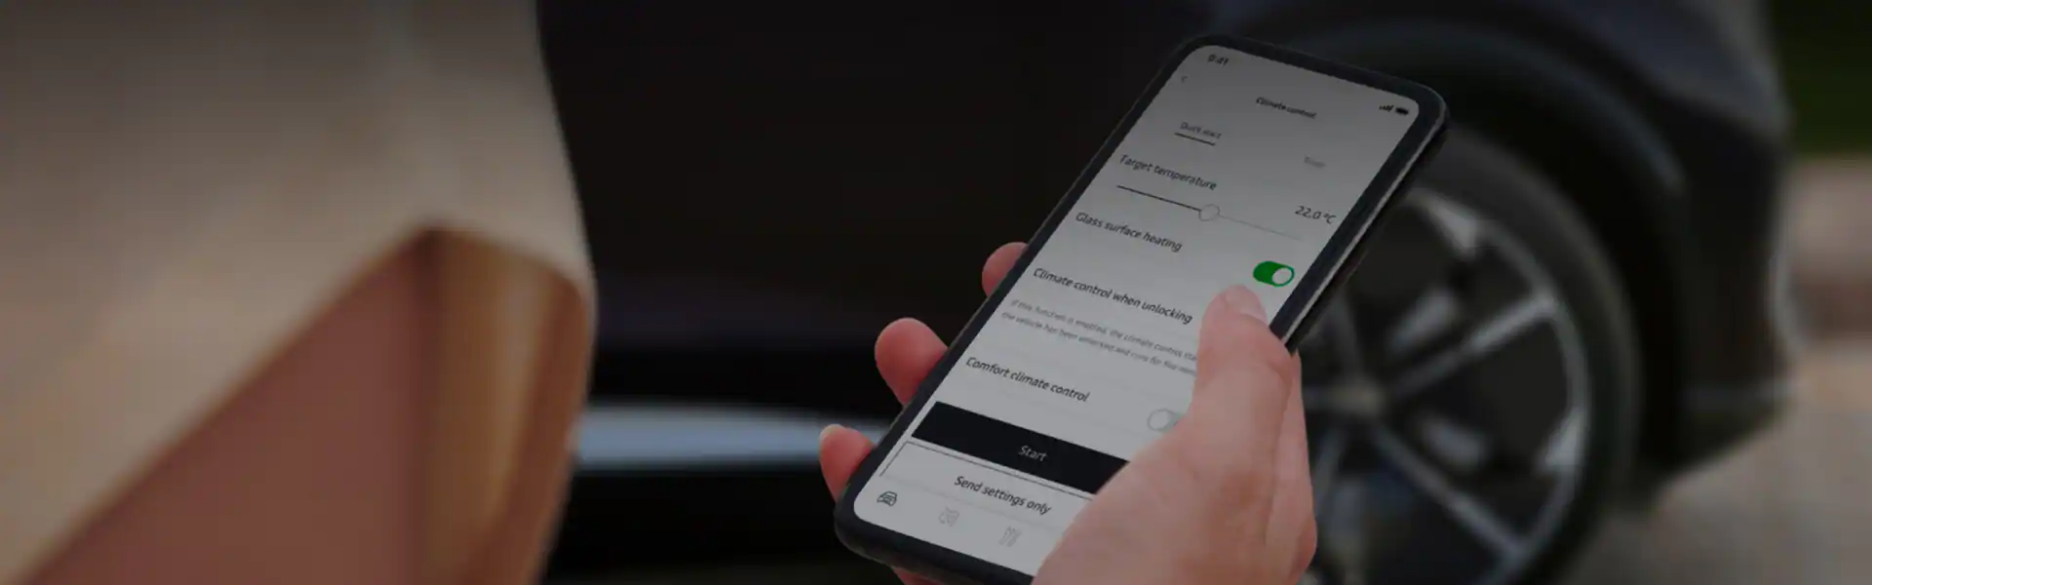 Audi Connect open on a phone